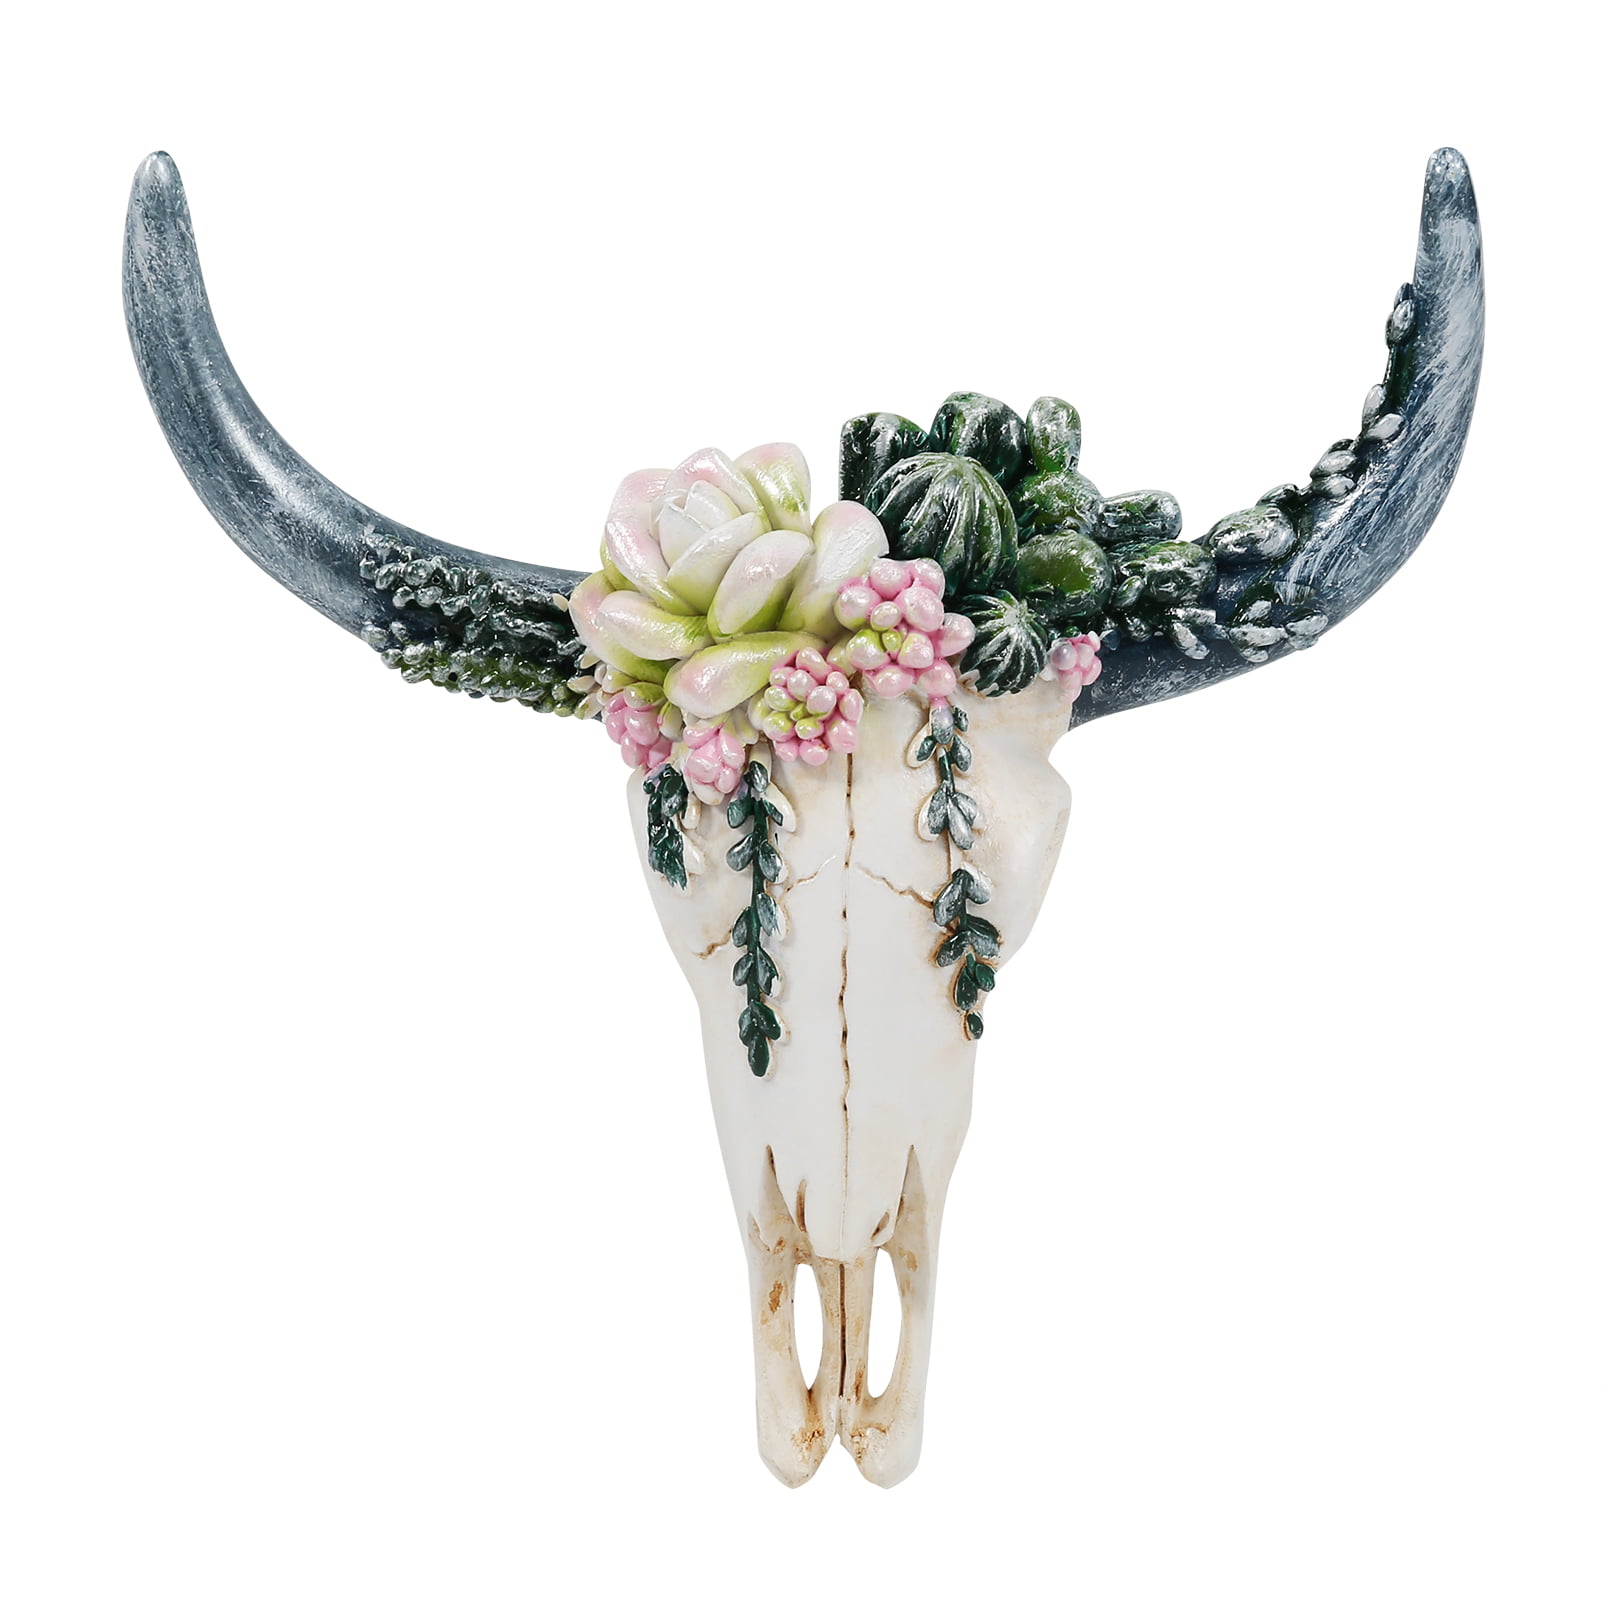 Aliwo Succulent/Flower Cow Skull Wall Decor Nursery Decor Resin Ornament with Hanging Hole